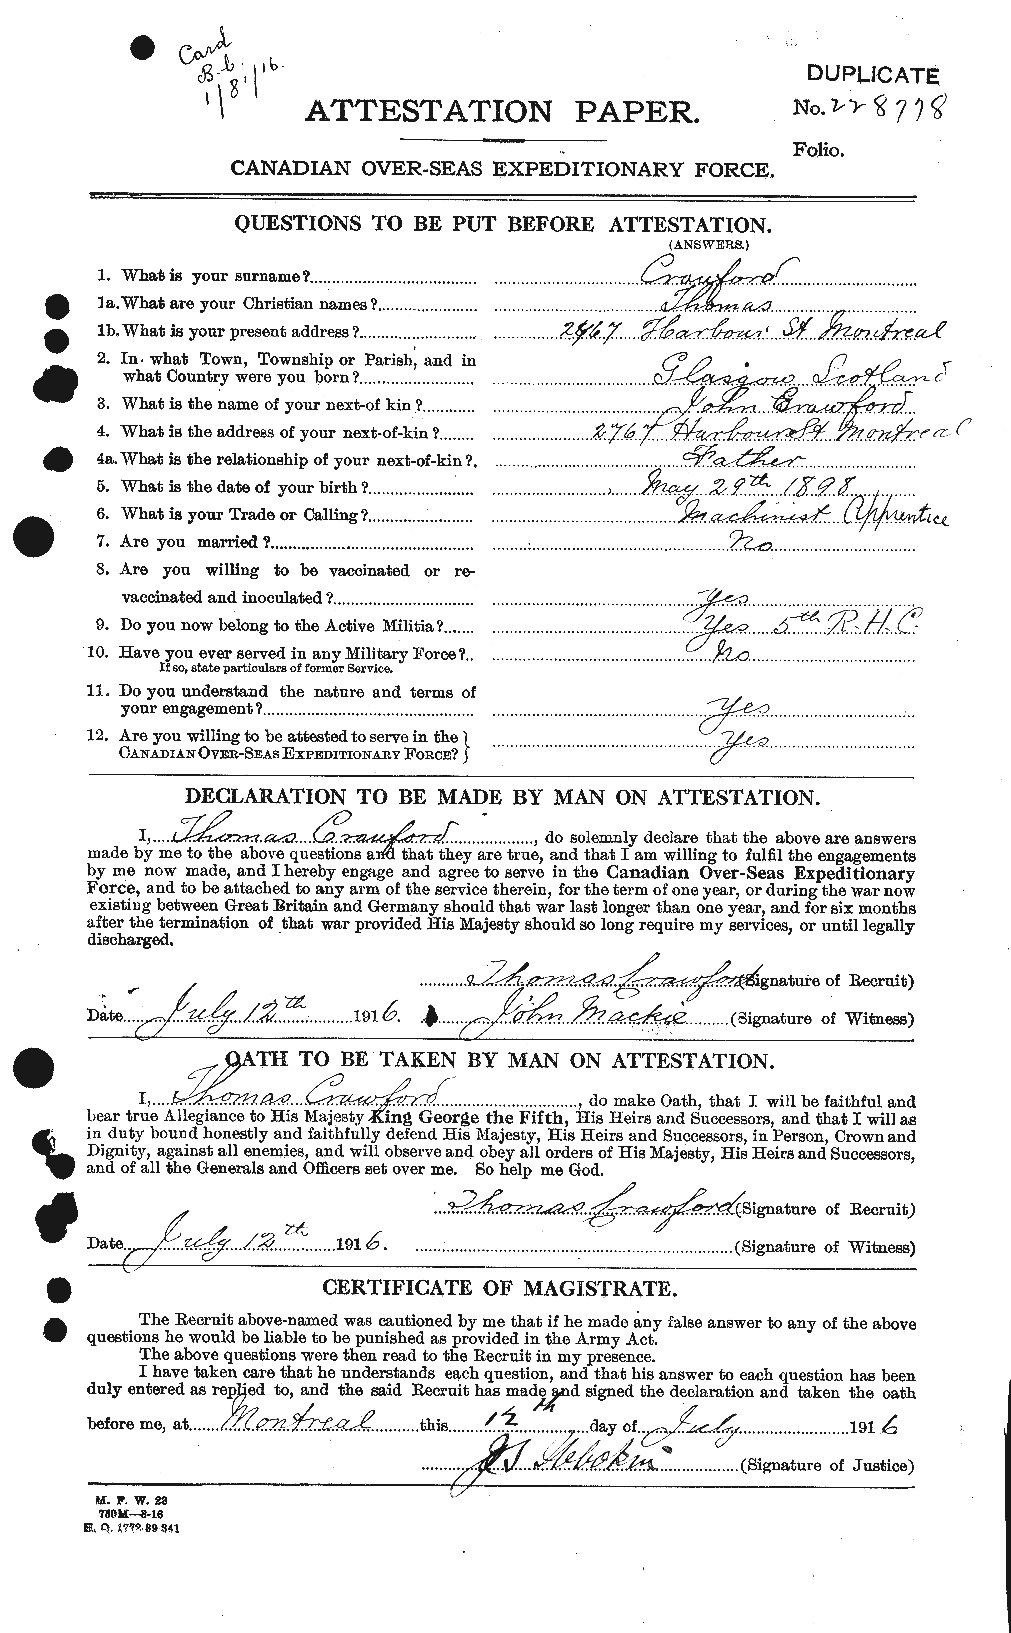 Personnel Records of the First World War - CEF 061361a